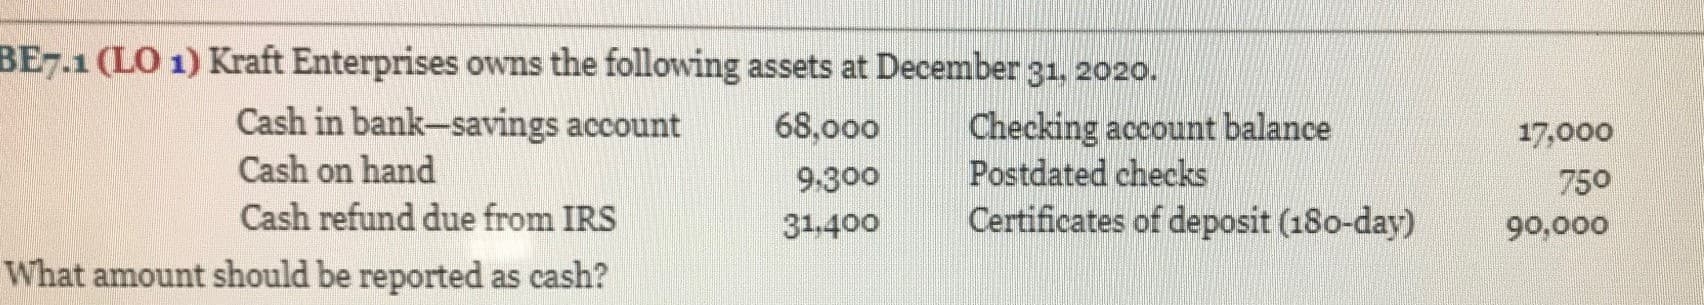 BE7.1 (LO 1) Kraft Enterprises owns the following assets at December 31, 2020.
Cash in bank-savings account
Checking account balance
Postdated checks
Certificates of deposit (180-day)
68,000
17,000
Cash on hand
9:300
750
Cash refund due from IRS
31,400
90,000
What amount should be reported as cash?
